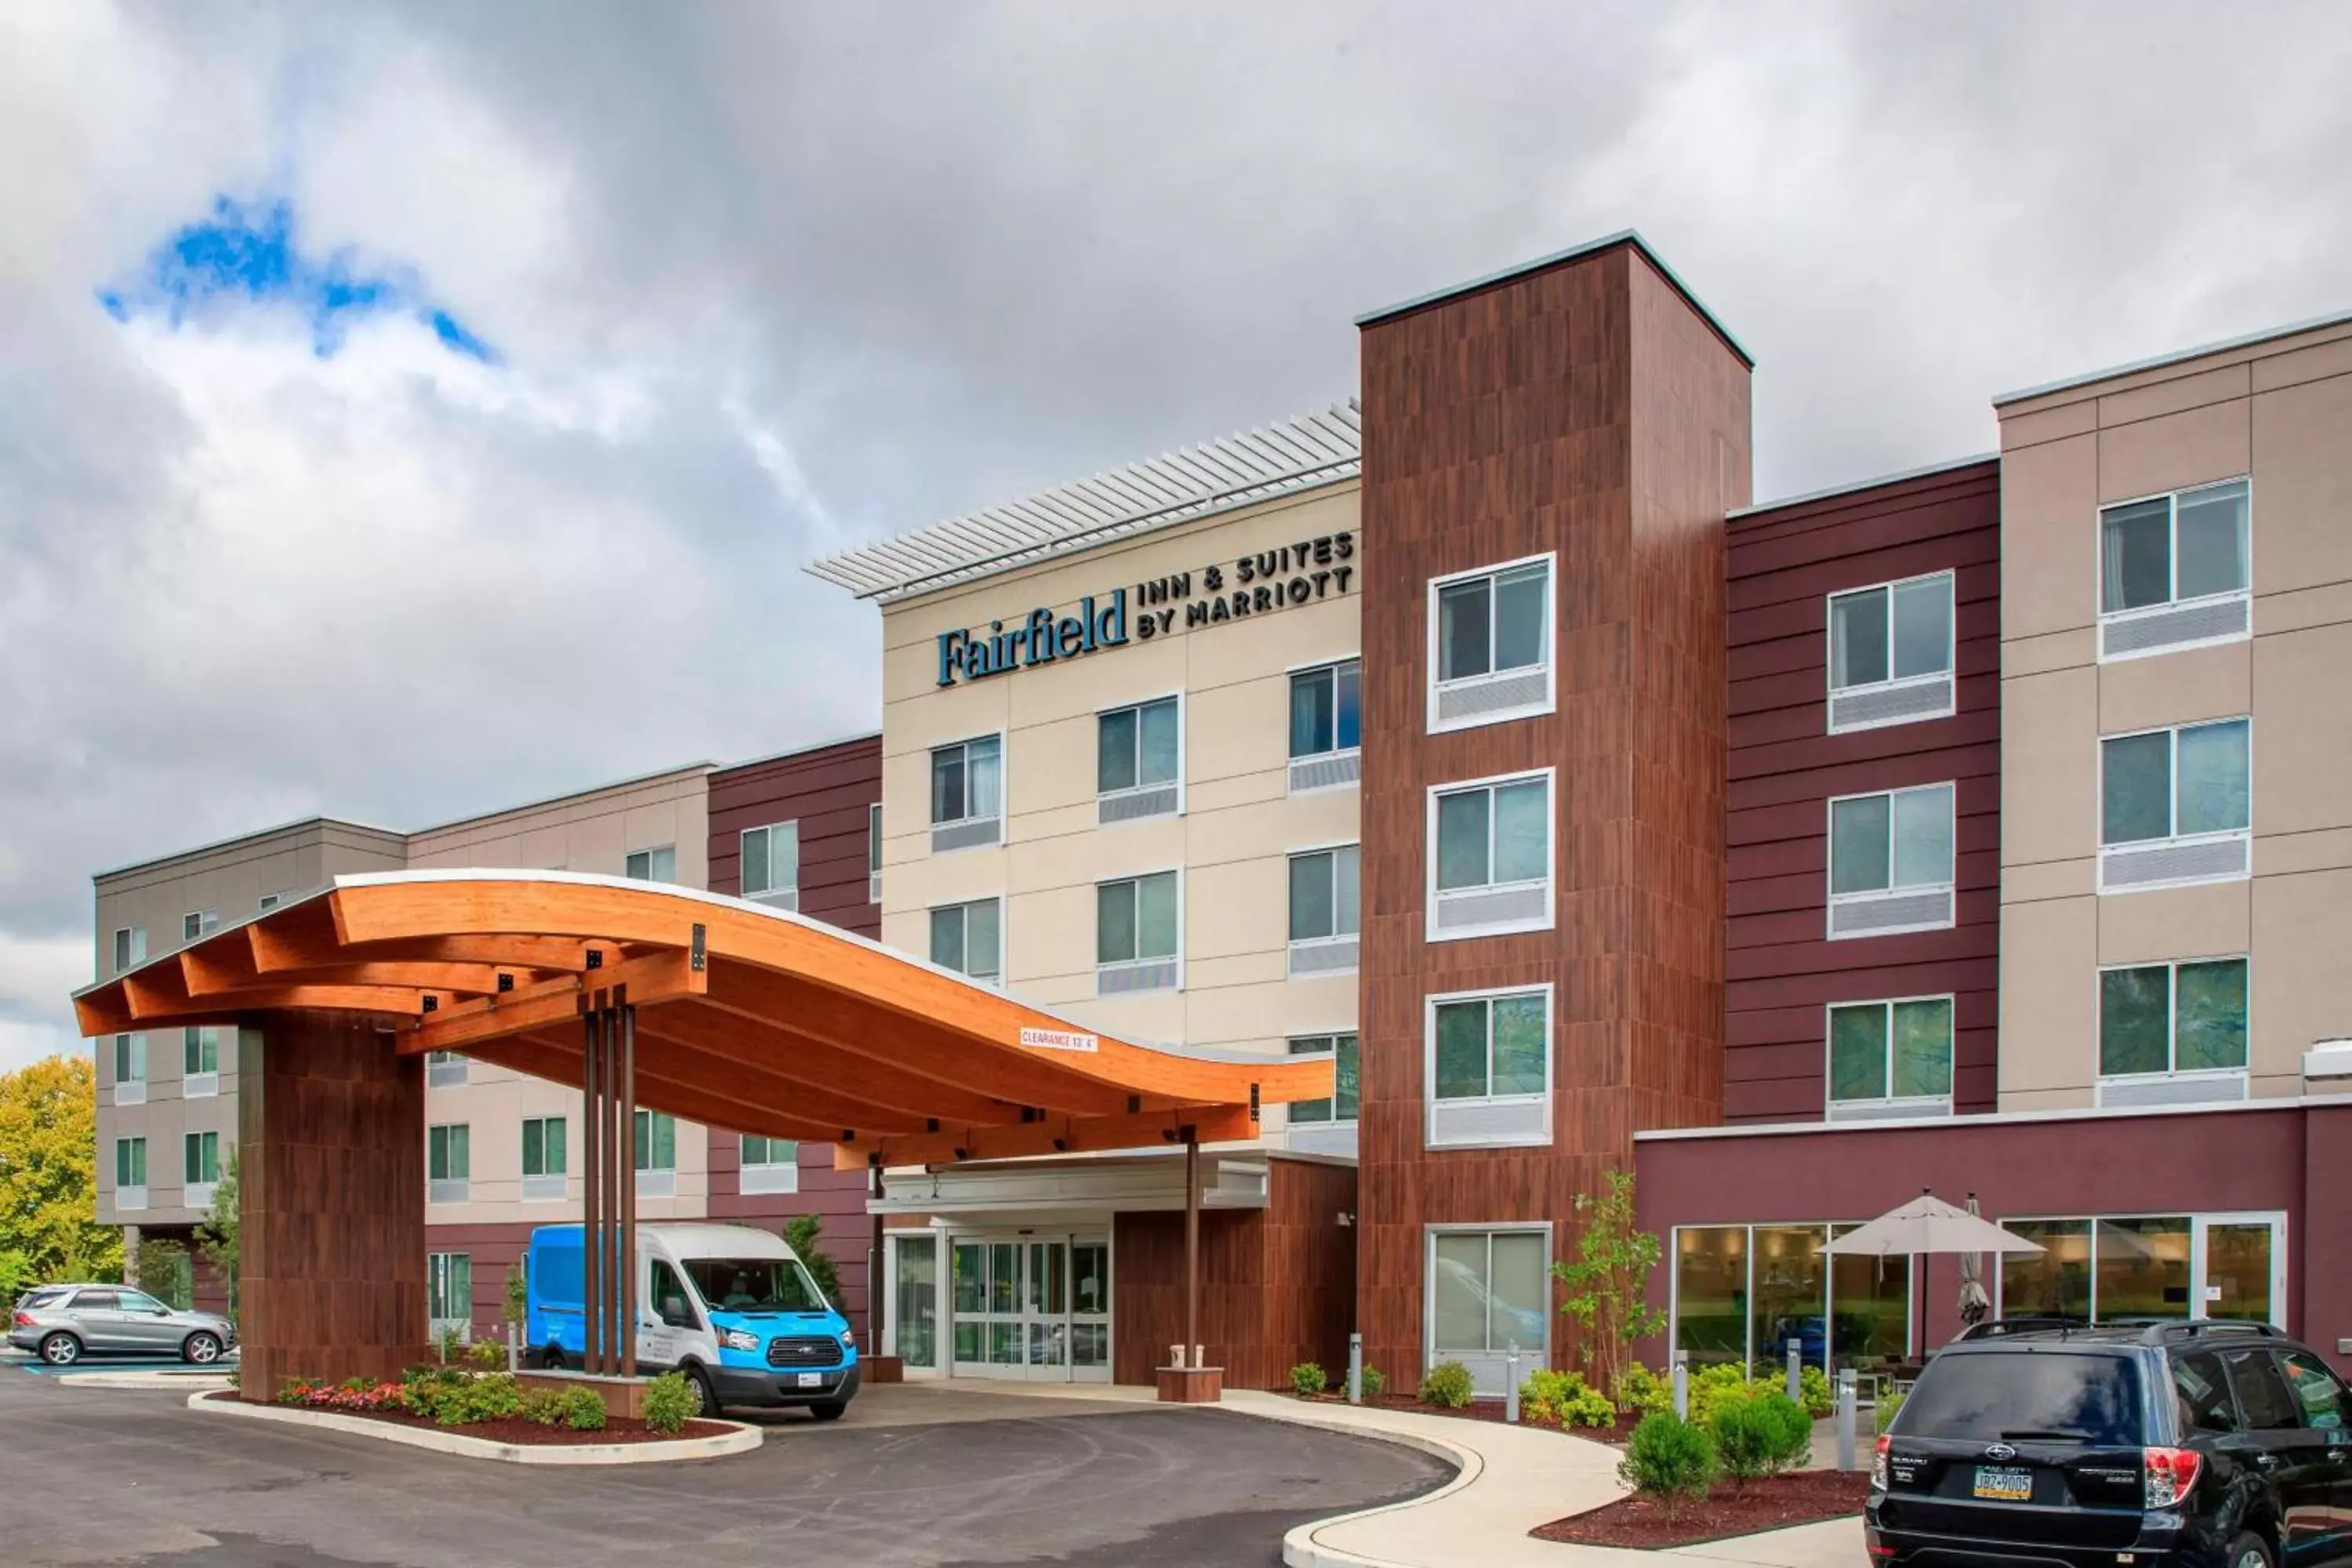 Property Building in Fairfield Inn & Suites by Marriott Philadelphia Valley Forge/Great Valley